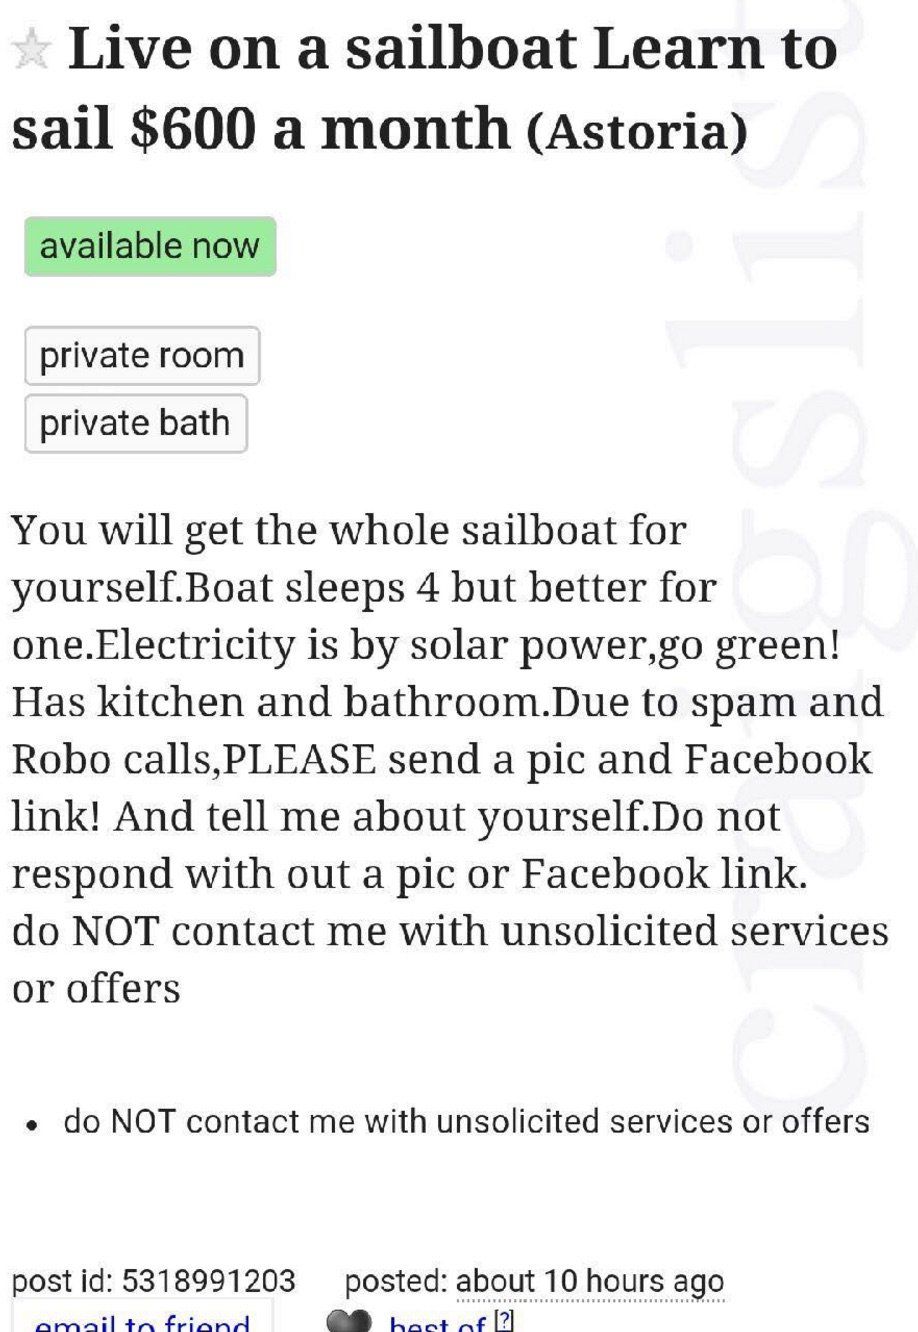 An ad for a room on a sailboat<br/>